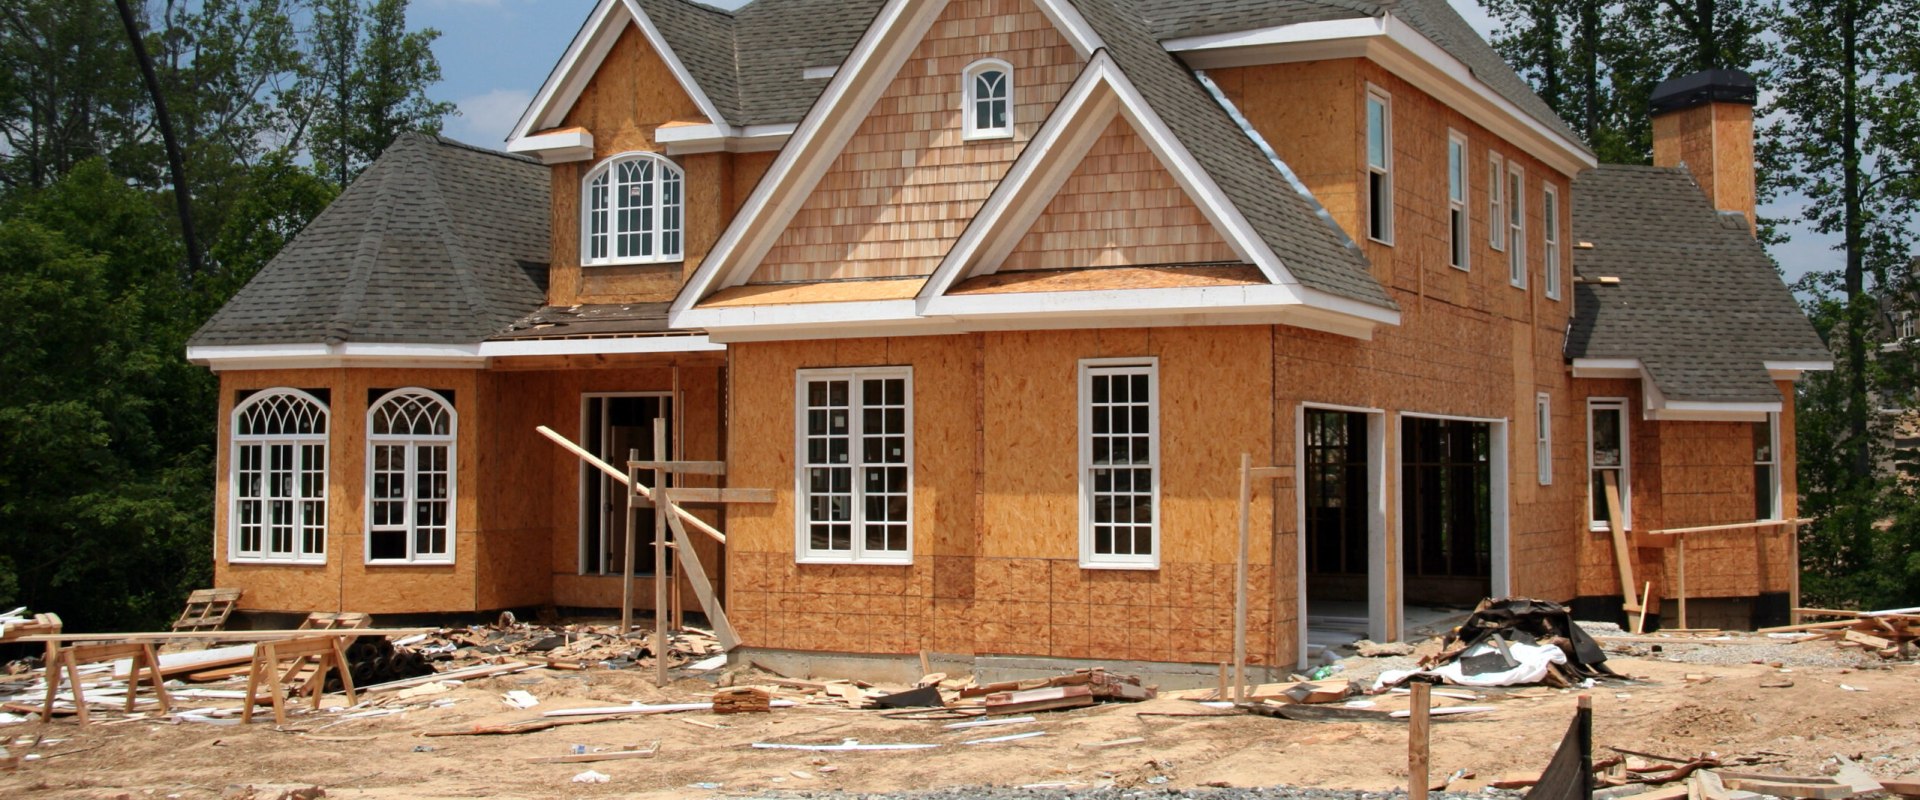 Building a Custom Home: The Process of Constructing Your Dream Home